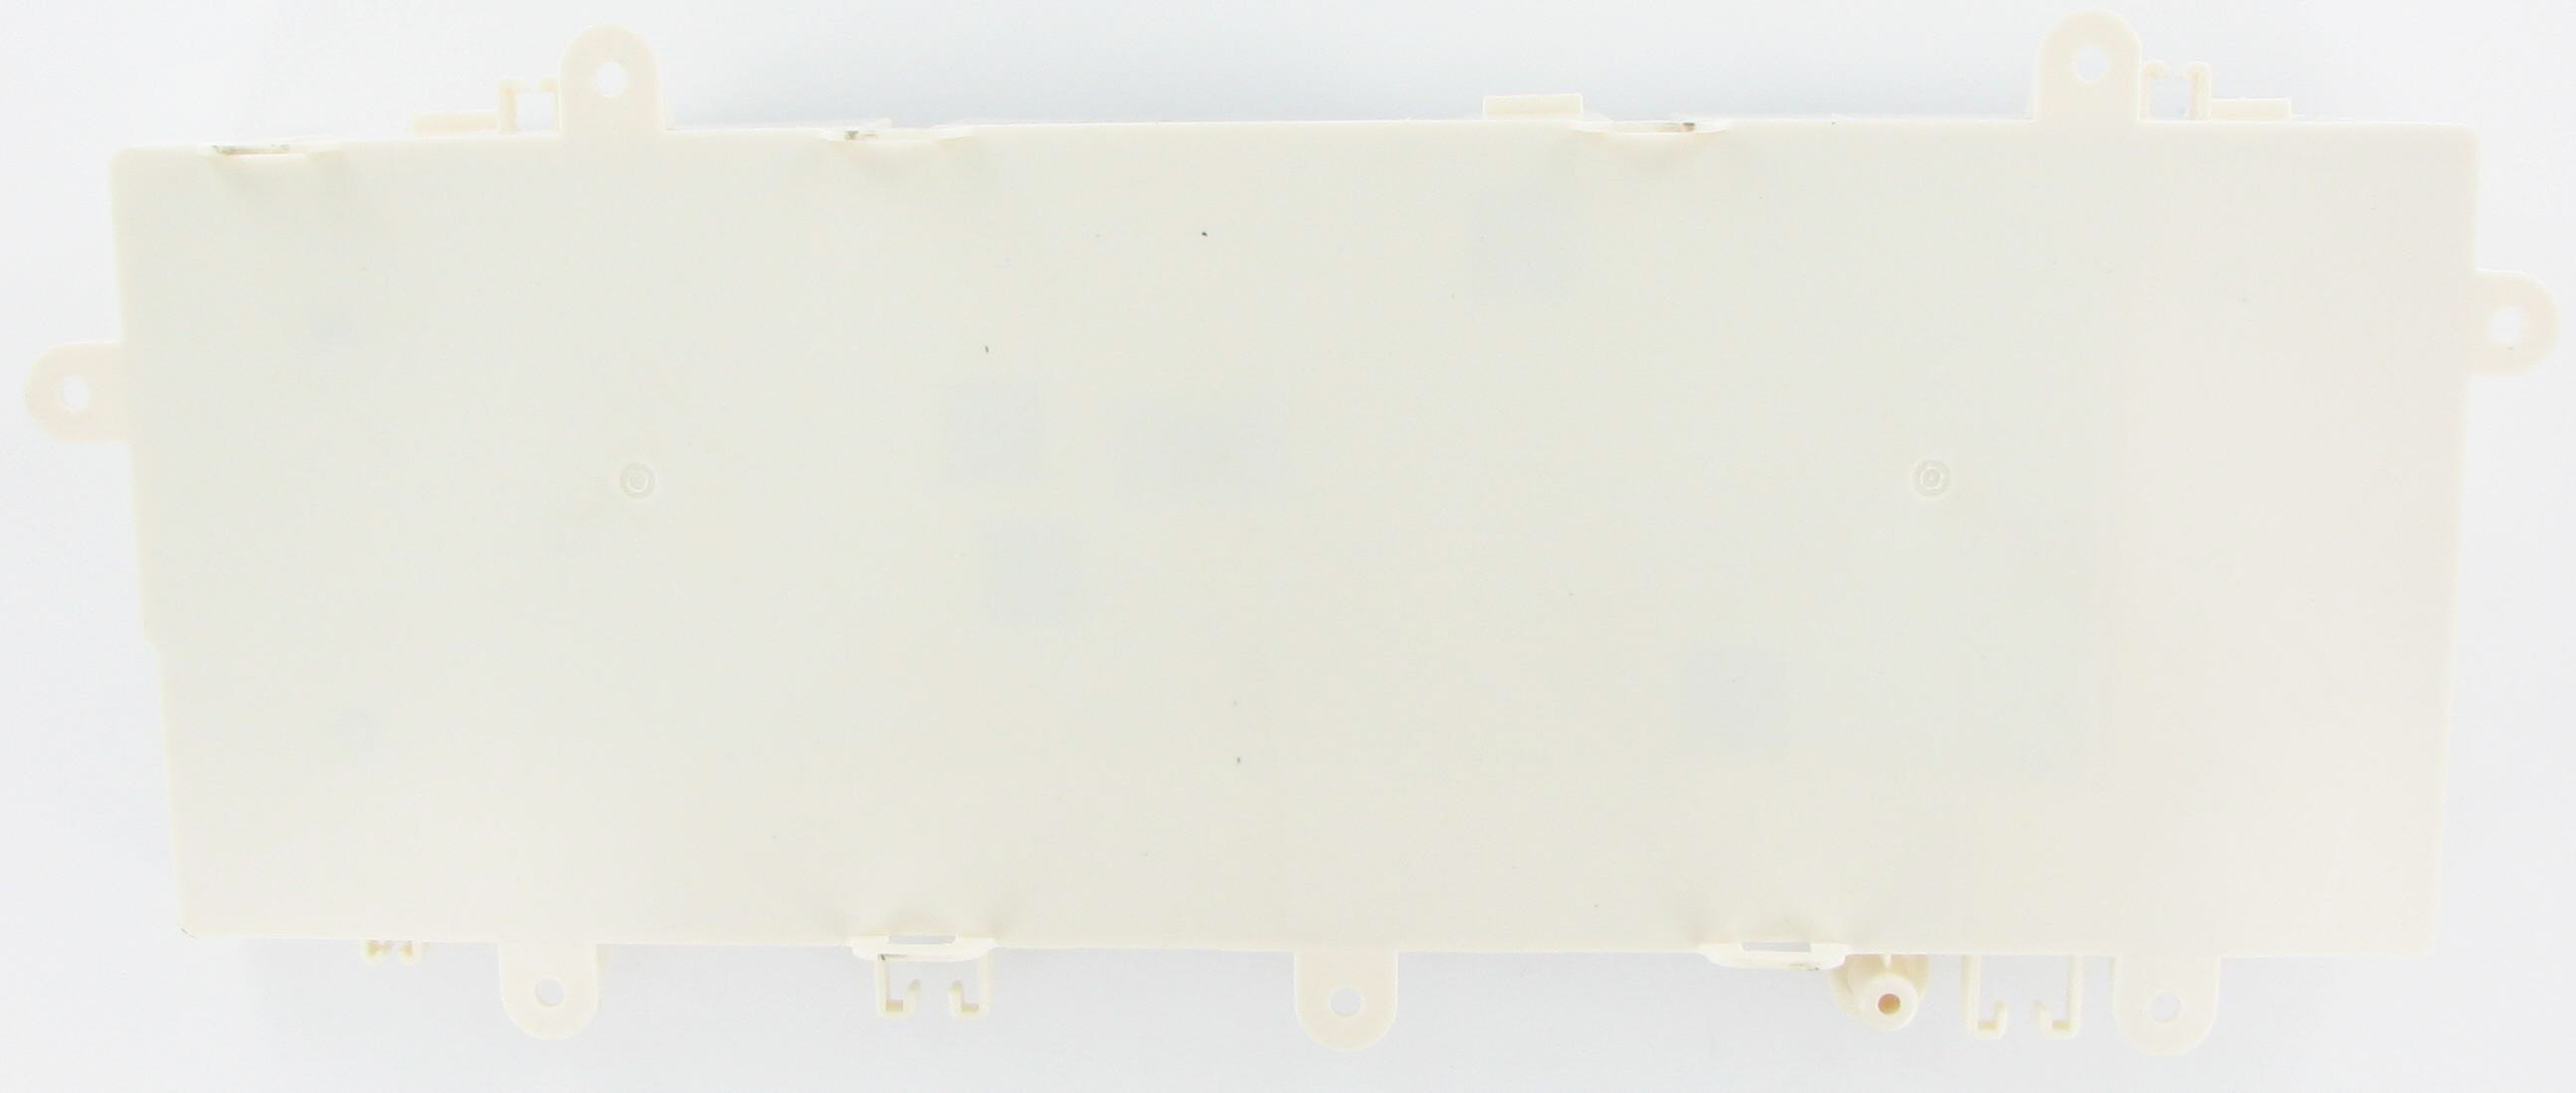 LG Kenmore EBR62707619 Laundry Dryer PCB Assembly Board 